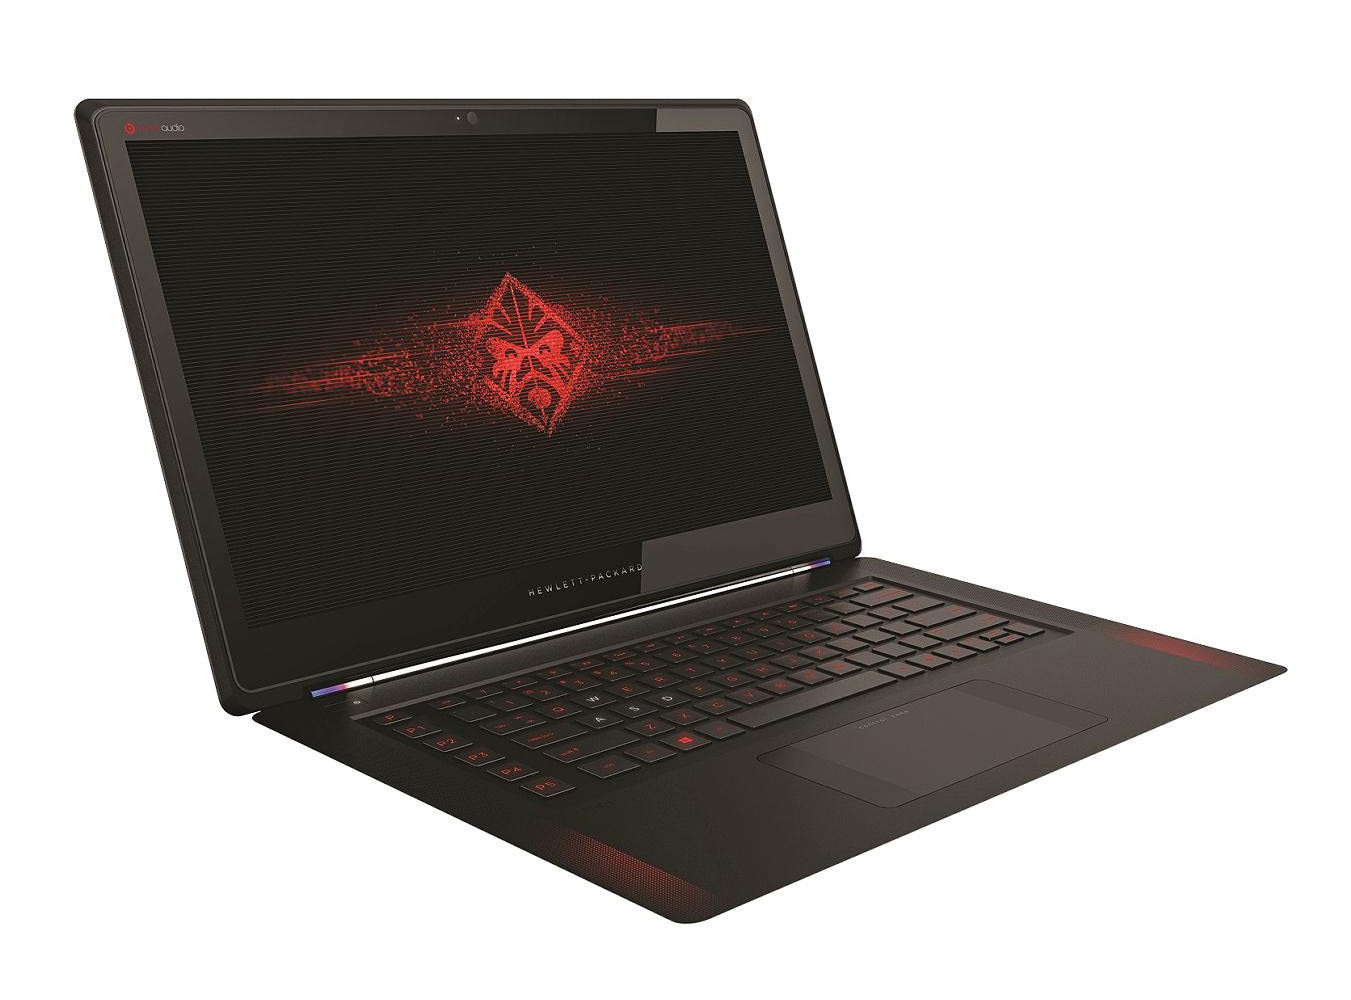 Today HP announced its new HP OMEN notebook PC, a laptop designed for 